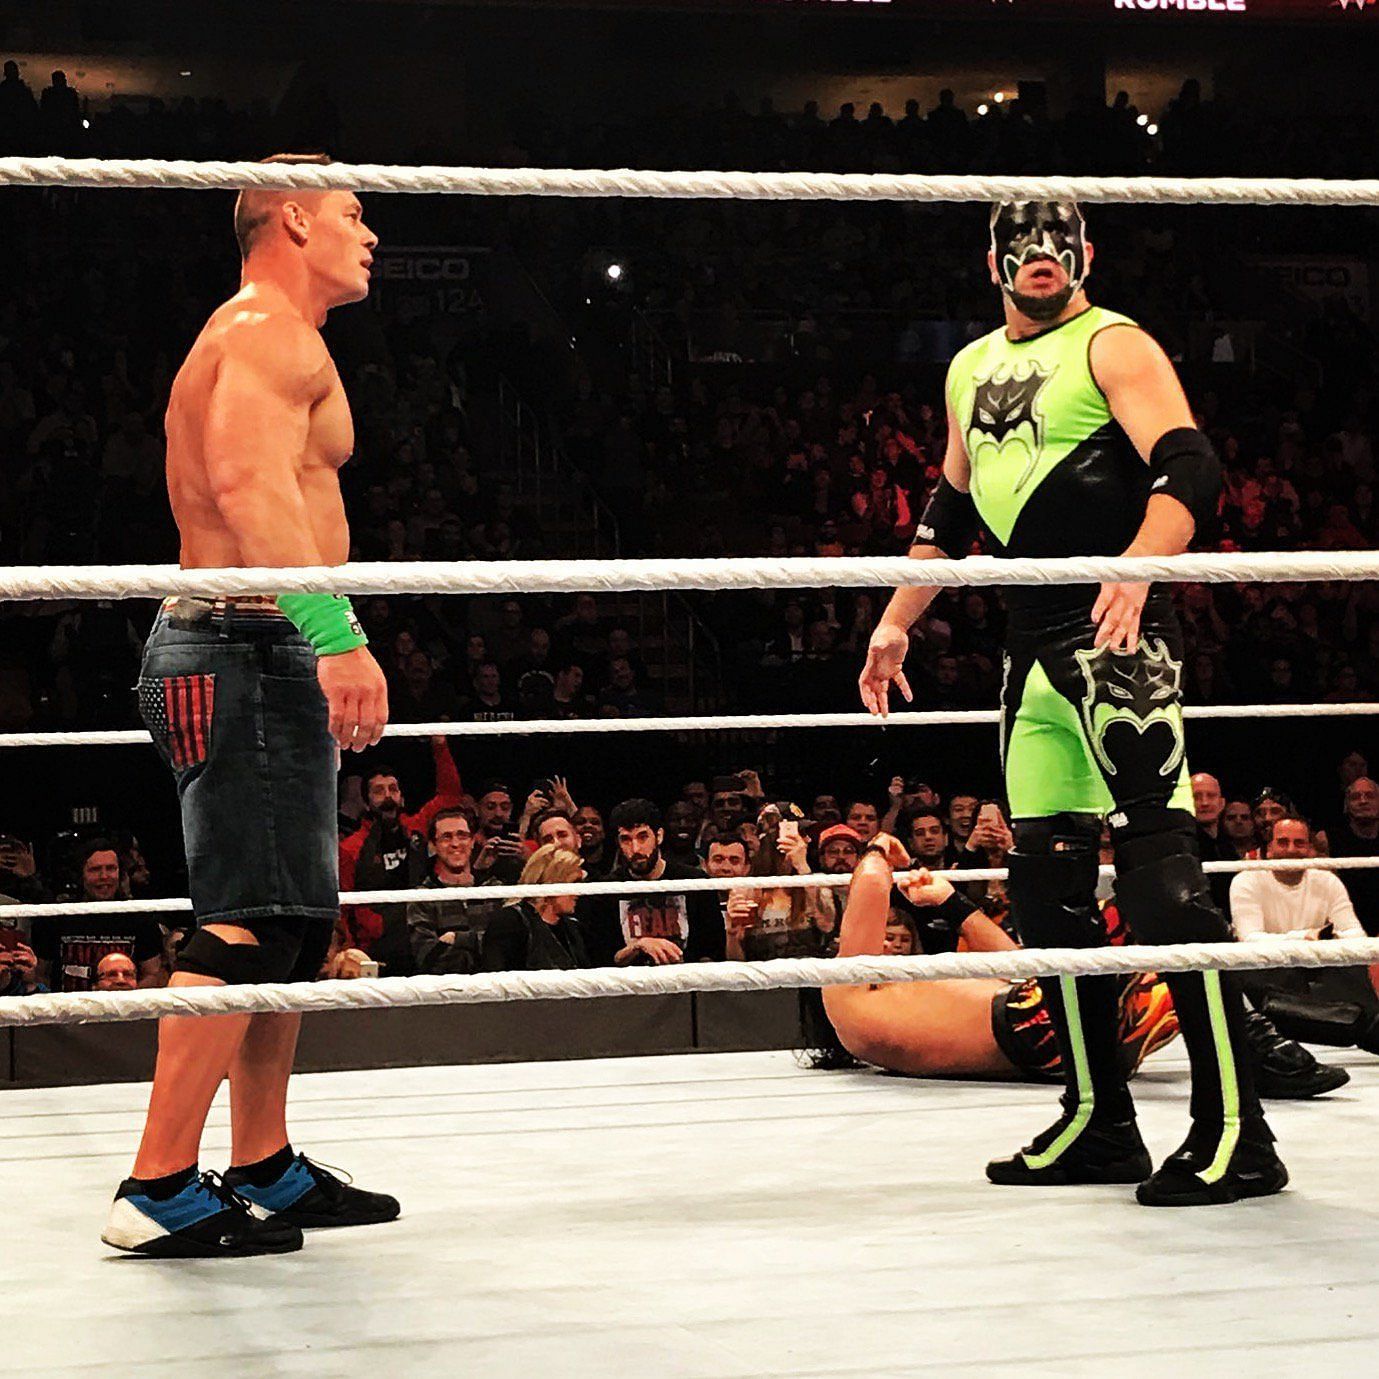 The Hurricane with John Cena at the Royal Rumble 2018 match